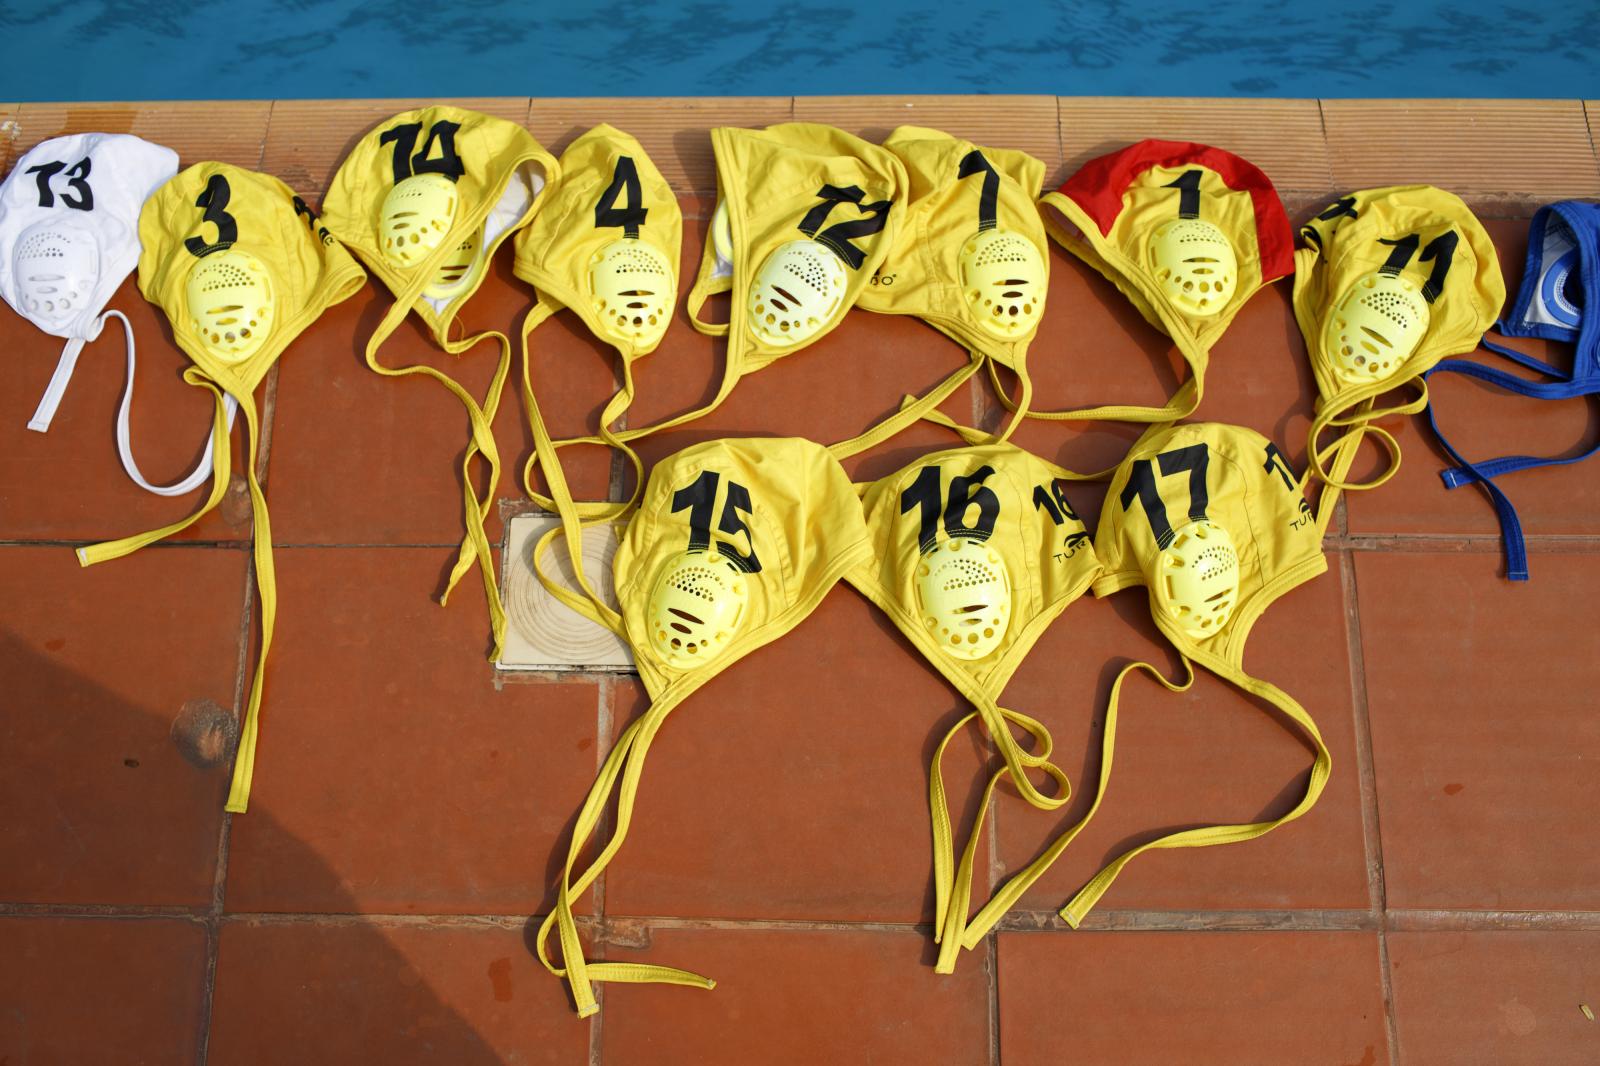 Water Polo - Water polo caps are displayed by the poolside during an...